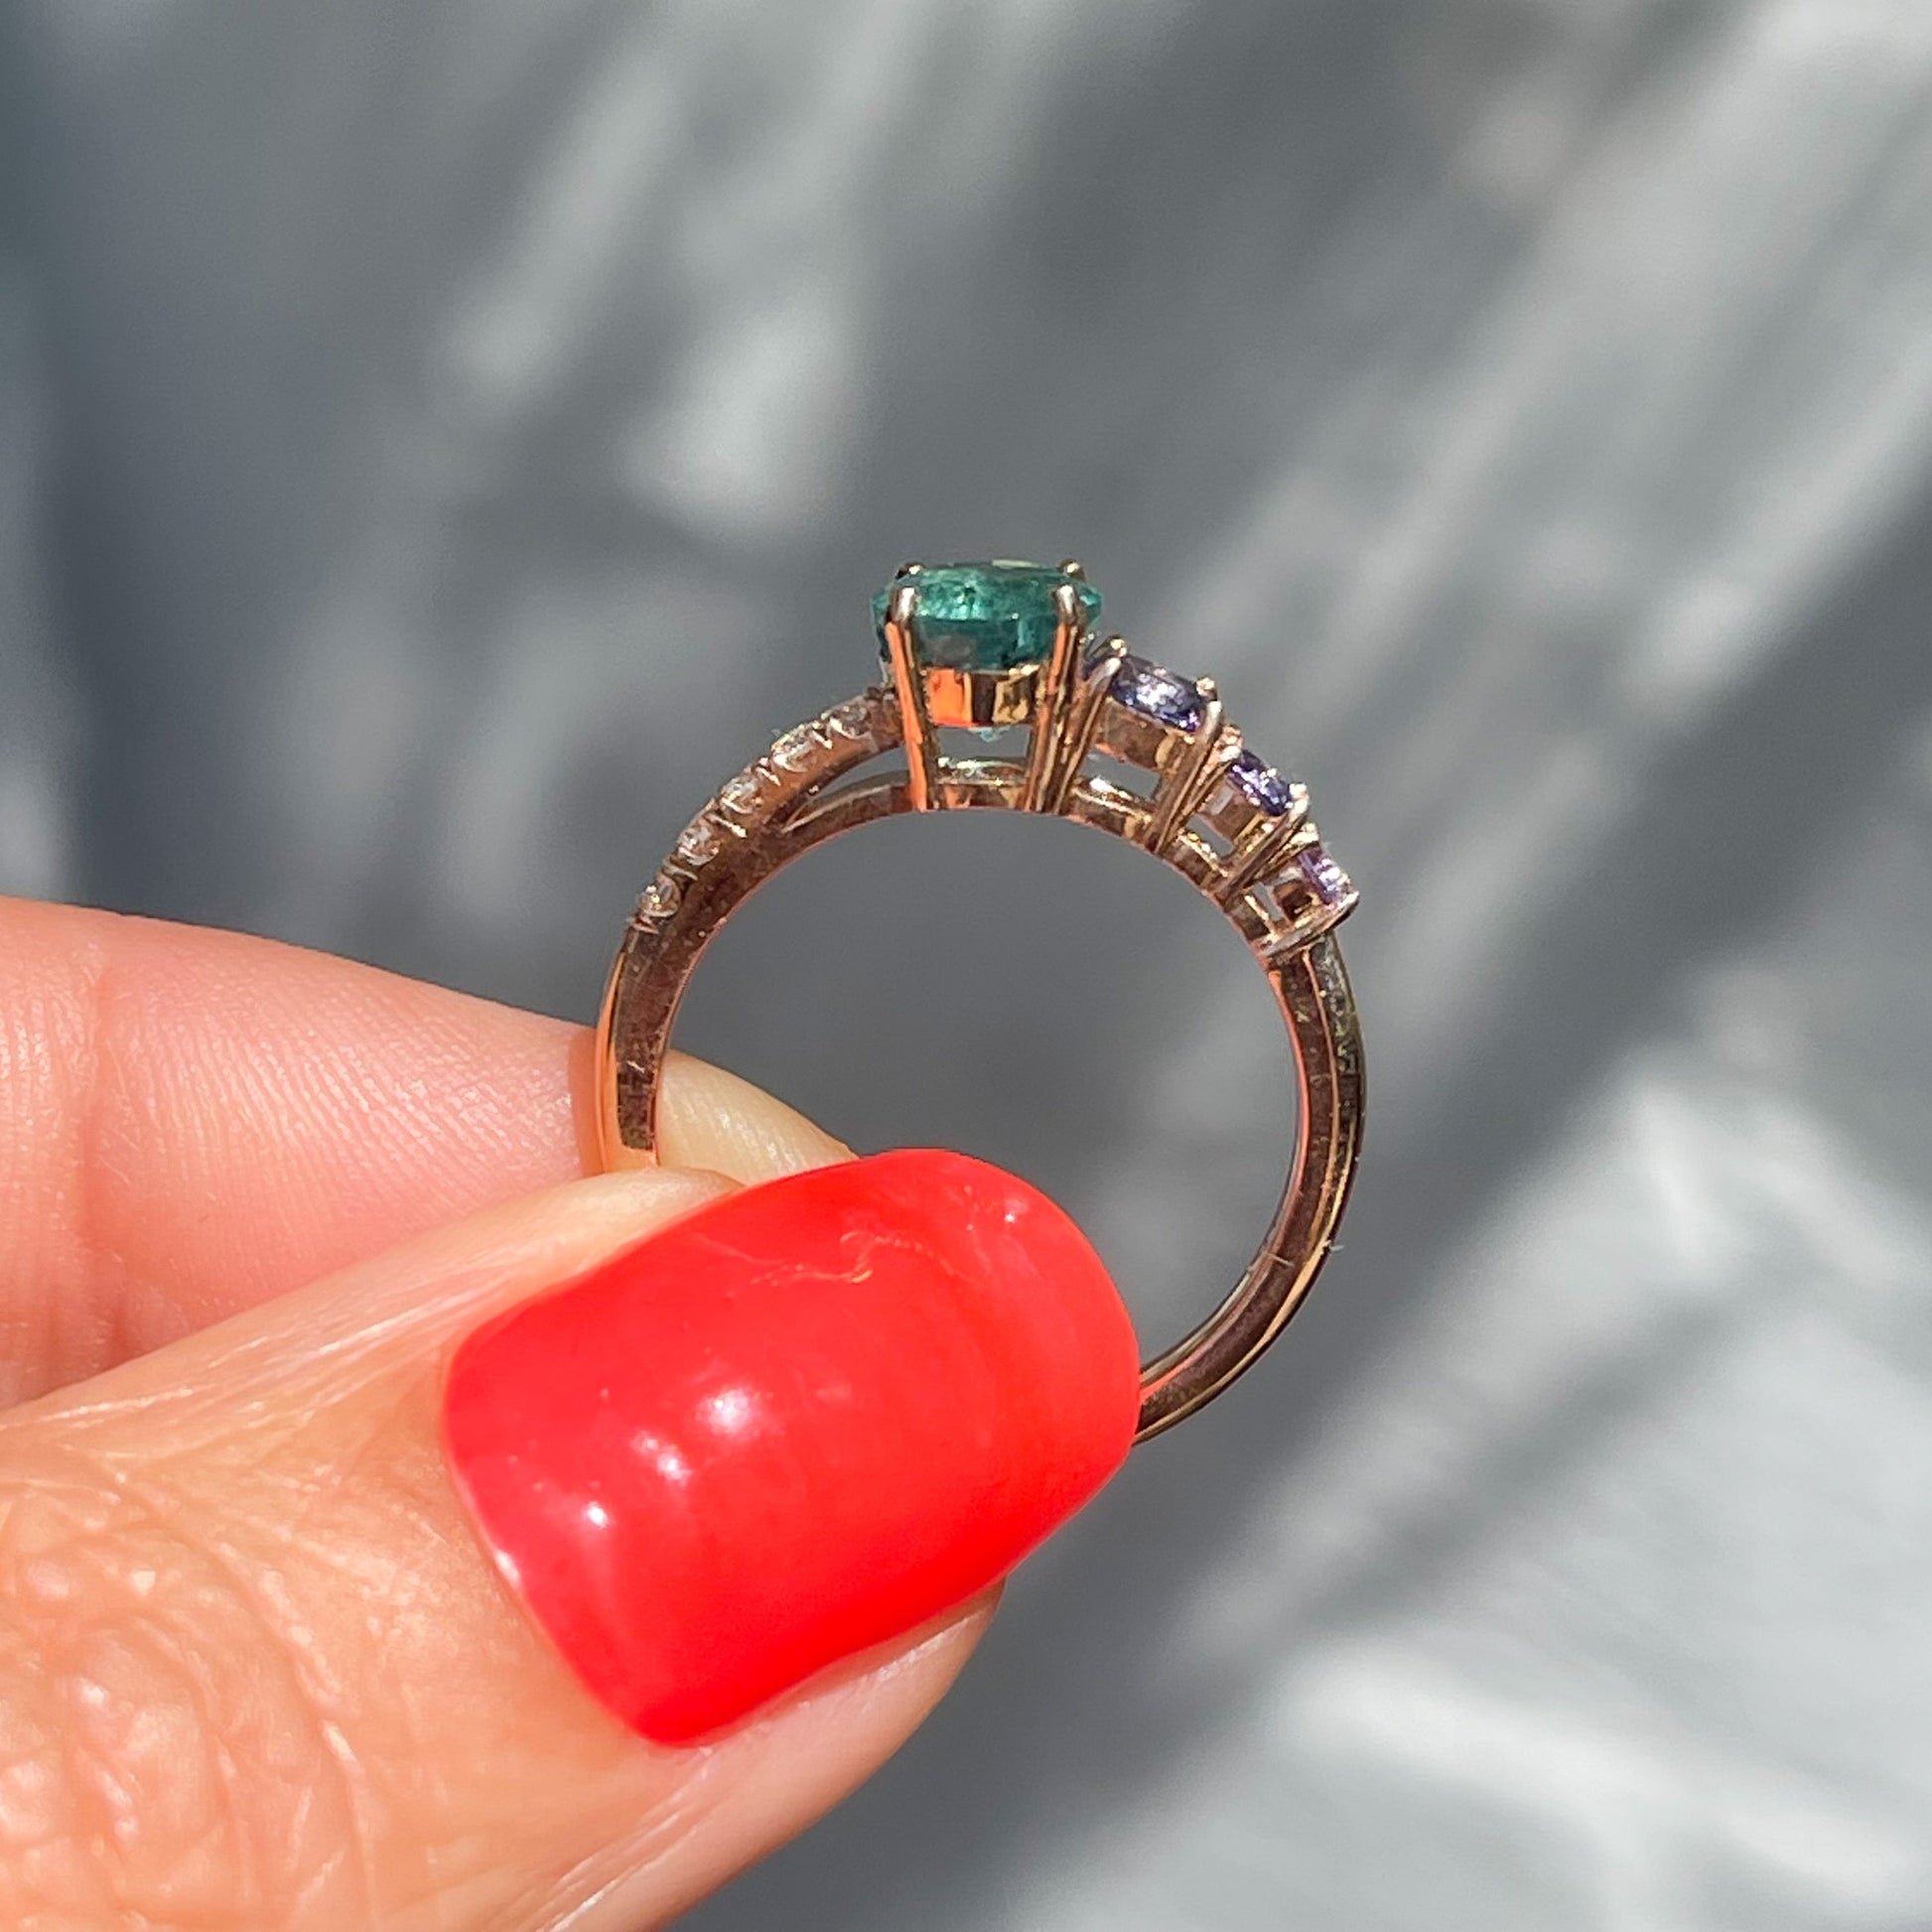 A Colombian Emerald Ring by NIXIN Jewelry shown in full profile. The one of a kind green emerald ring is set in 14k rose gold.